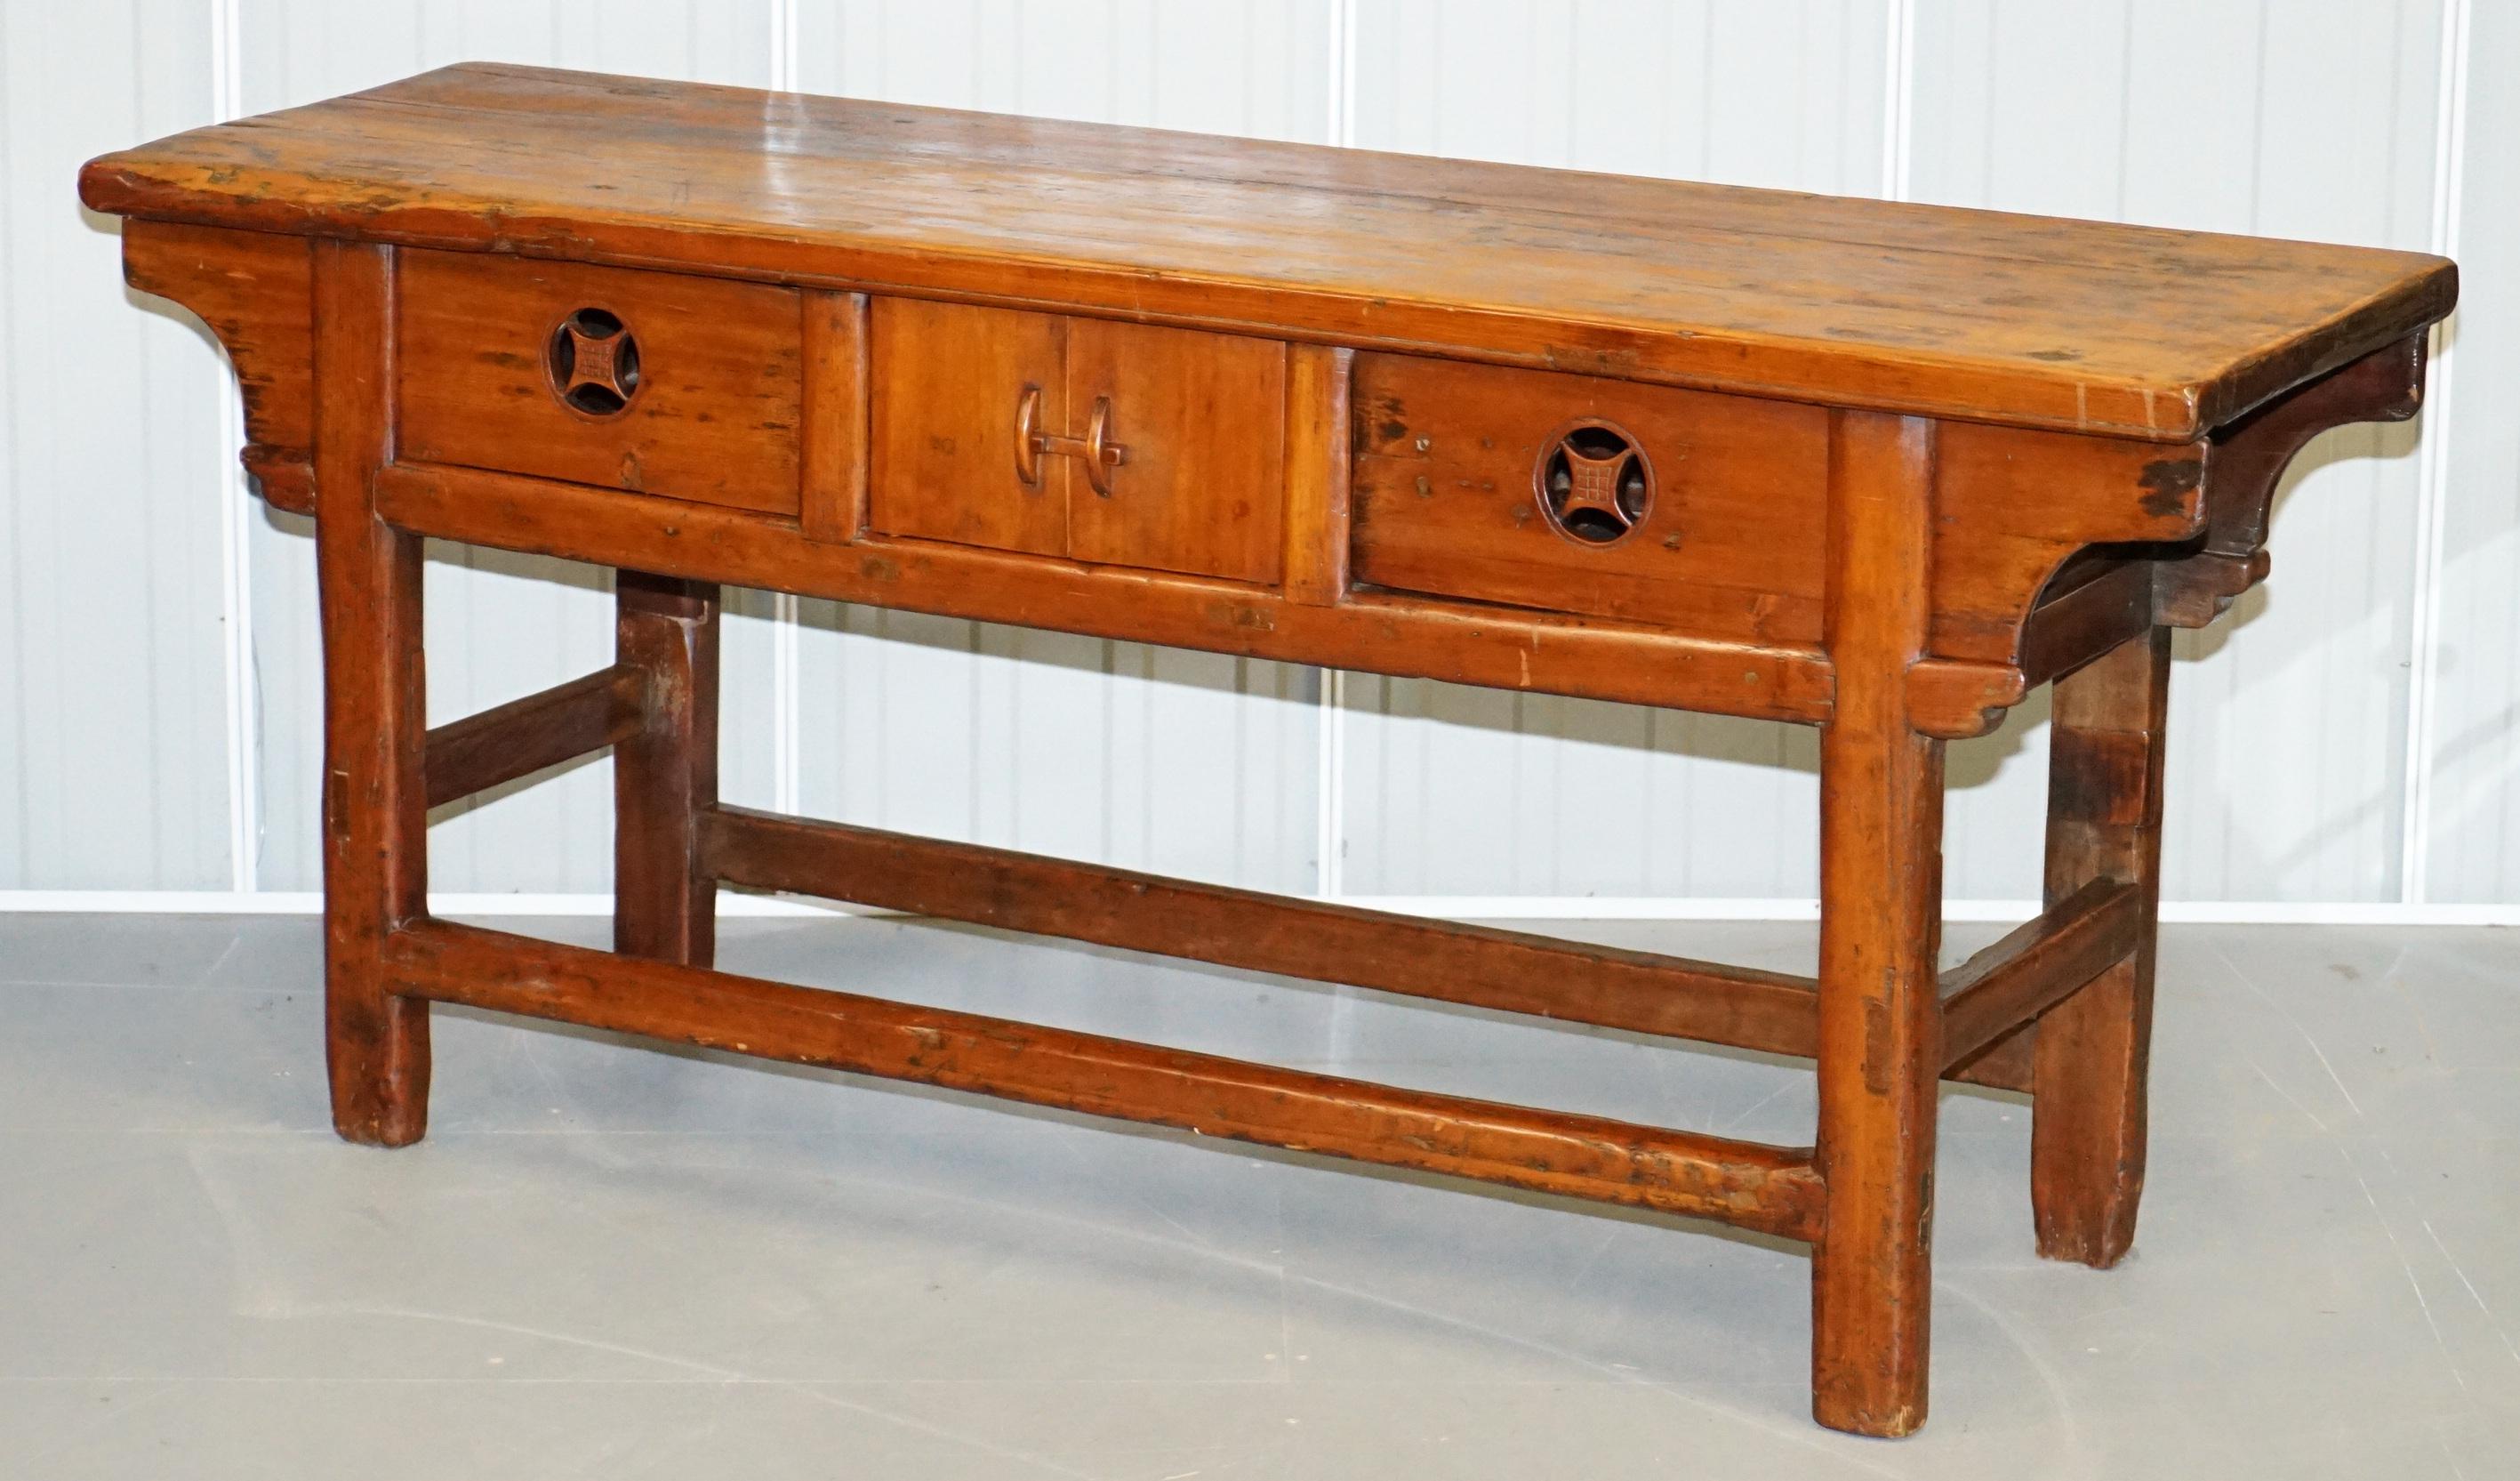 We are delighted to offer for sale this lovely vintage Chinese alter sideboard with original finish

A very good looking and naively made antique sideboard. Its hand carved from solid slabs of teak, the finish is distressed, the top bowed towards